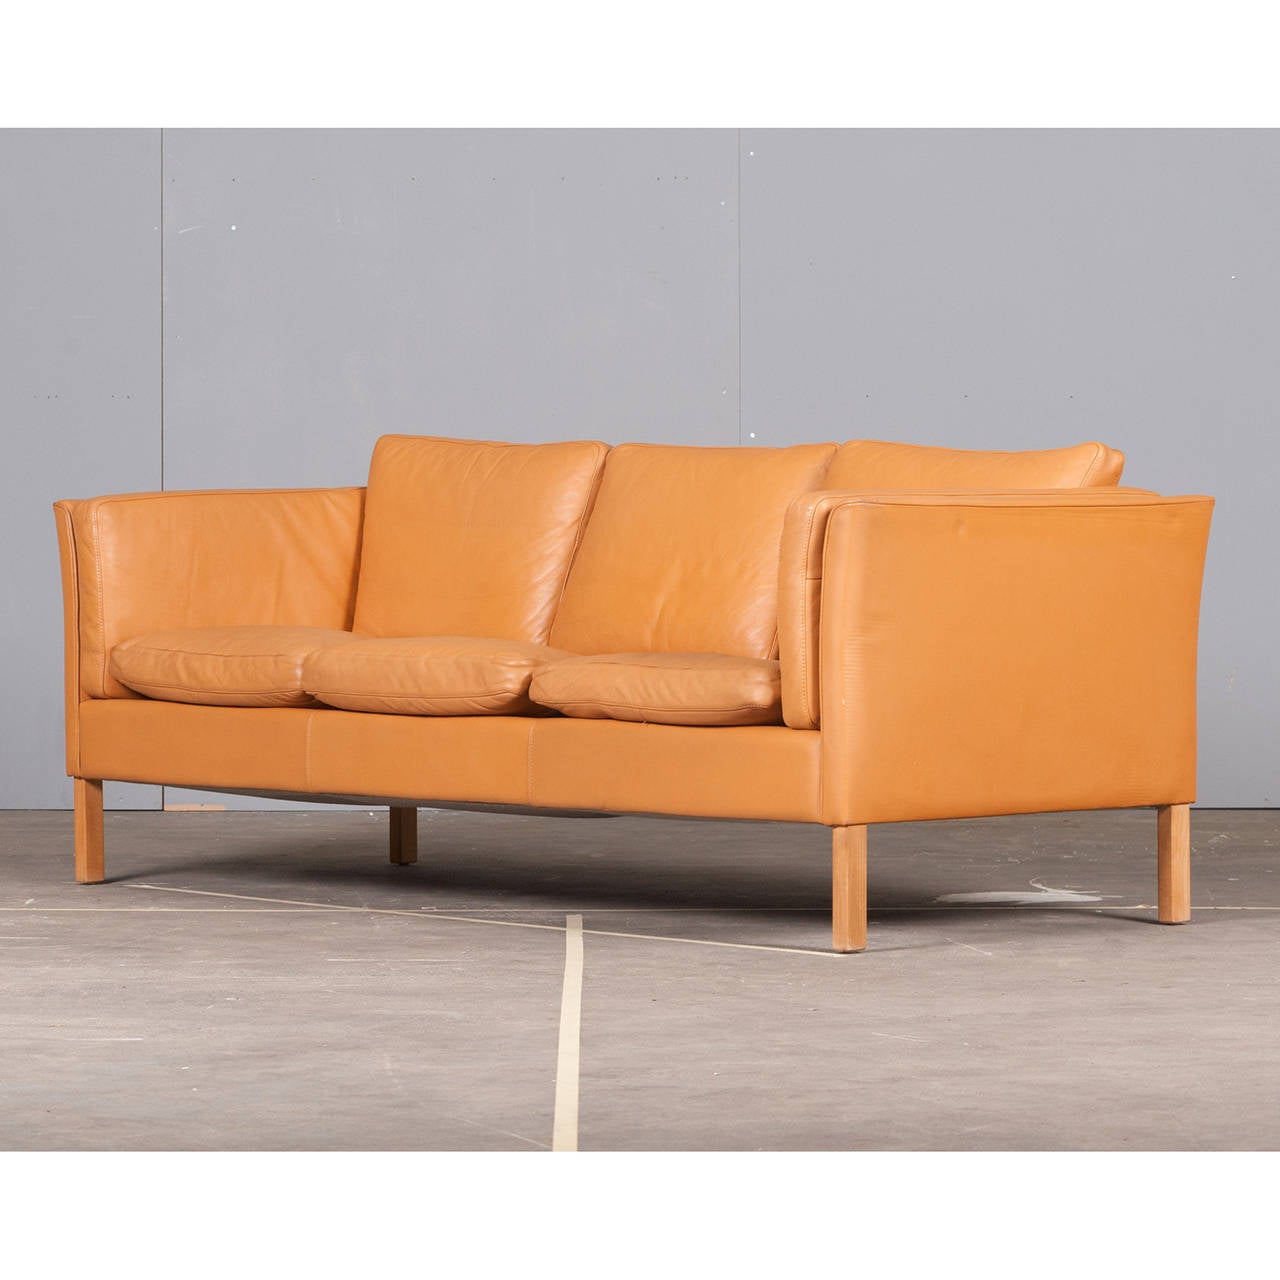 This Danish sofa is a classic and favourite style here at Modern Times.  With a beautiful honey-tan coloured leather, this sofa is both stylish and comfortable.

We are pleased to offer complimentary shipping on this item for customers based